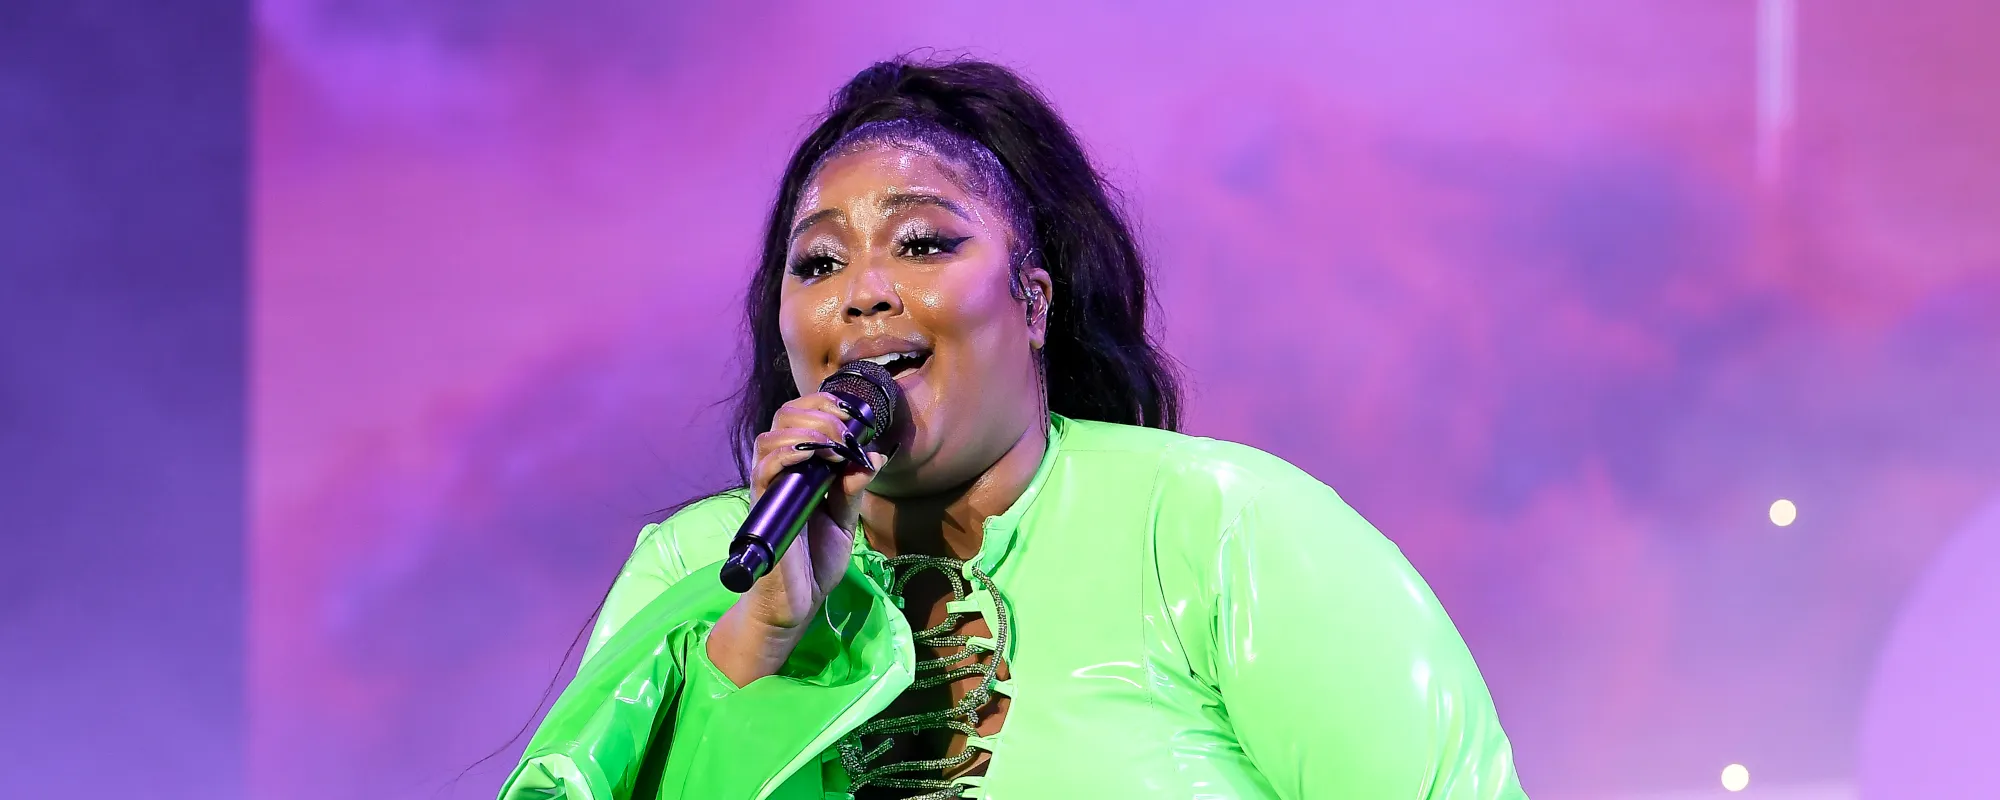 Lizzo Hosts, Performs on ‘Saturday Night Live’ Ahead of New LP Release